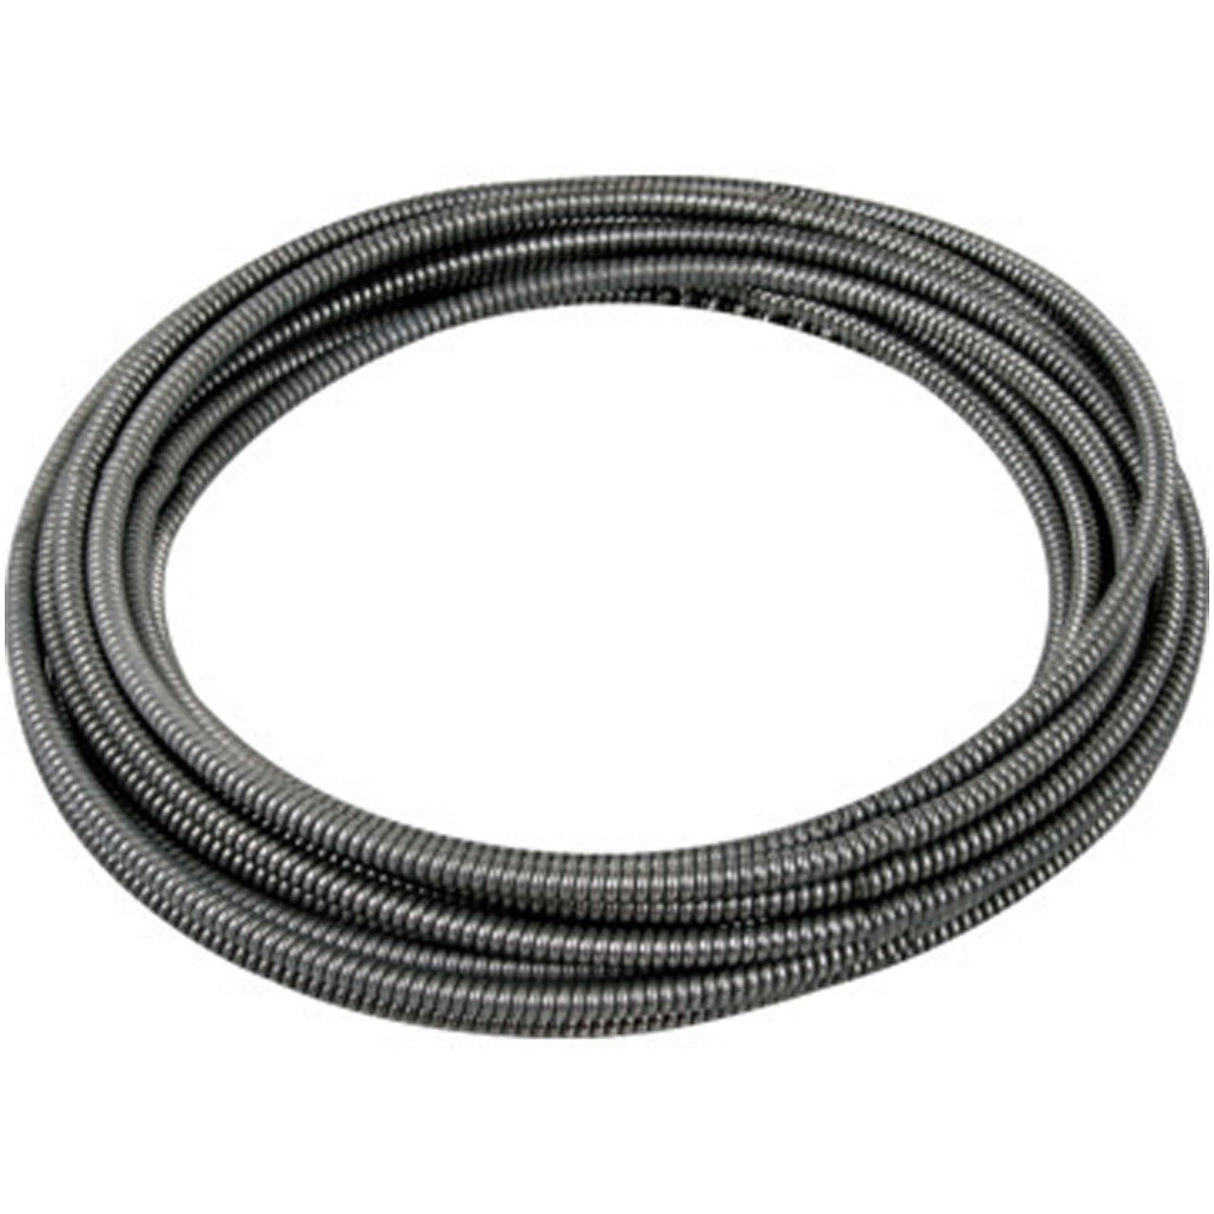 General Wire L-35FL1-A-DH 35' x 5/16" Down Head Replacement Flexicore Cables for Hand Tools (Handles Sold Separately)